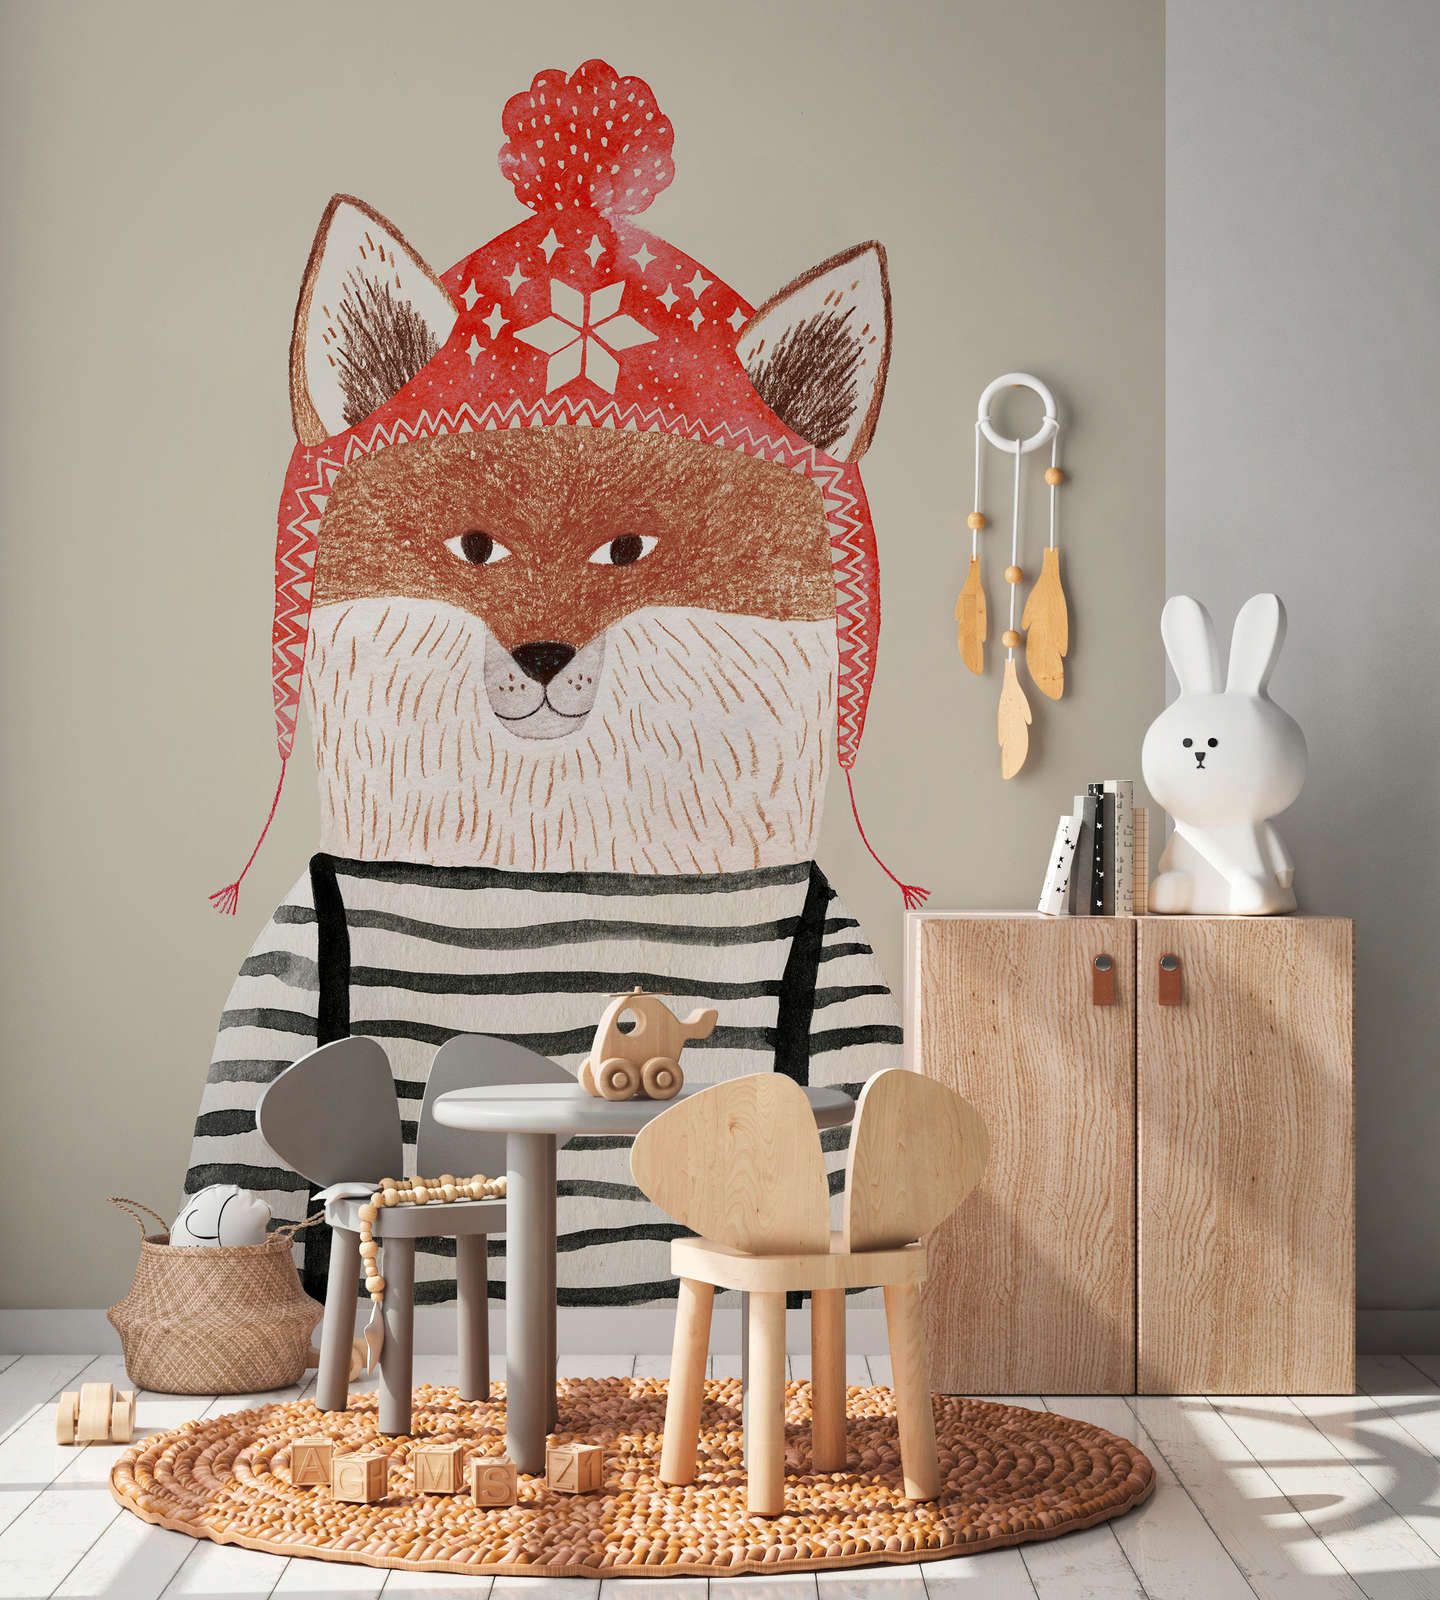             Fox with pom-pom hat mural - Smooth & pearlescent fleece
        